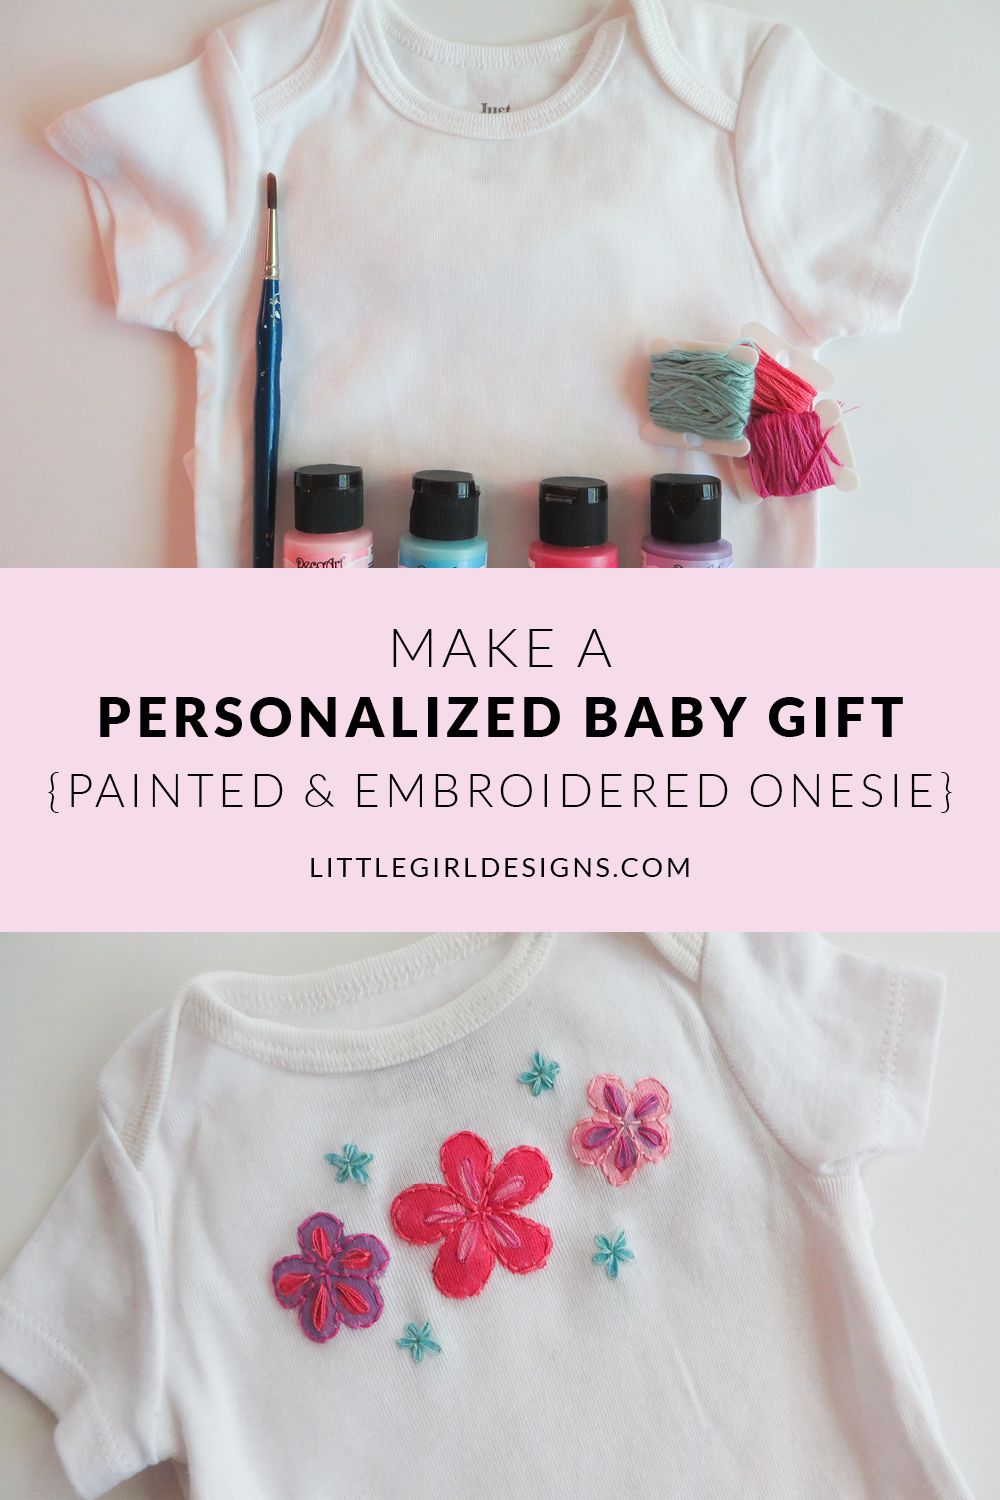 A Personalized Baby Gift: A Painted & Embroidered Onesie